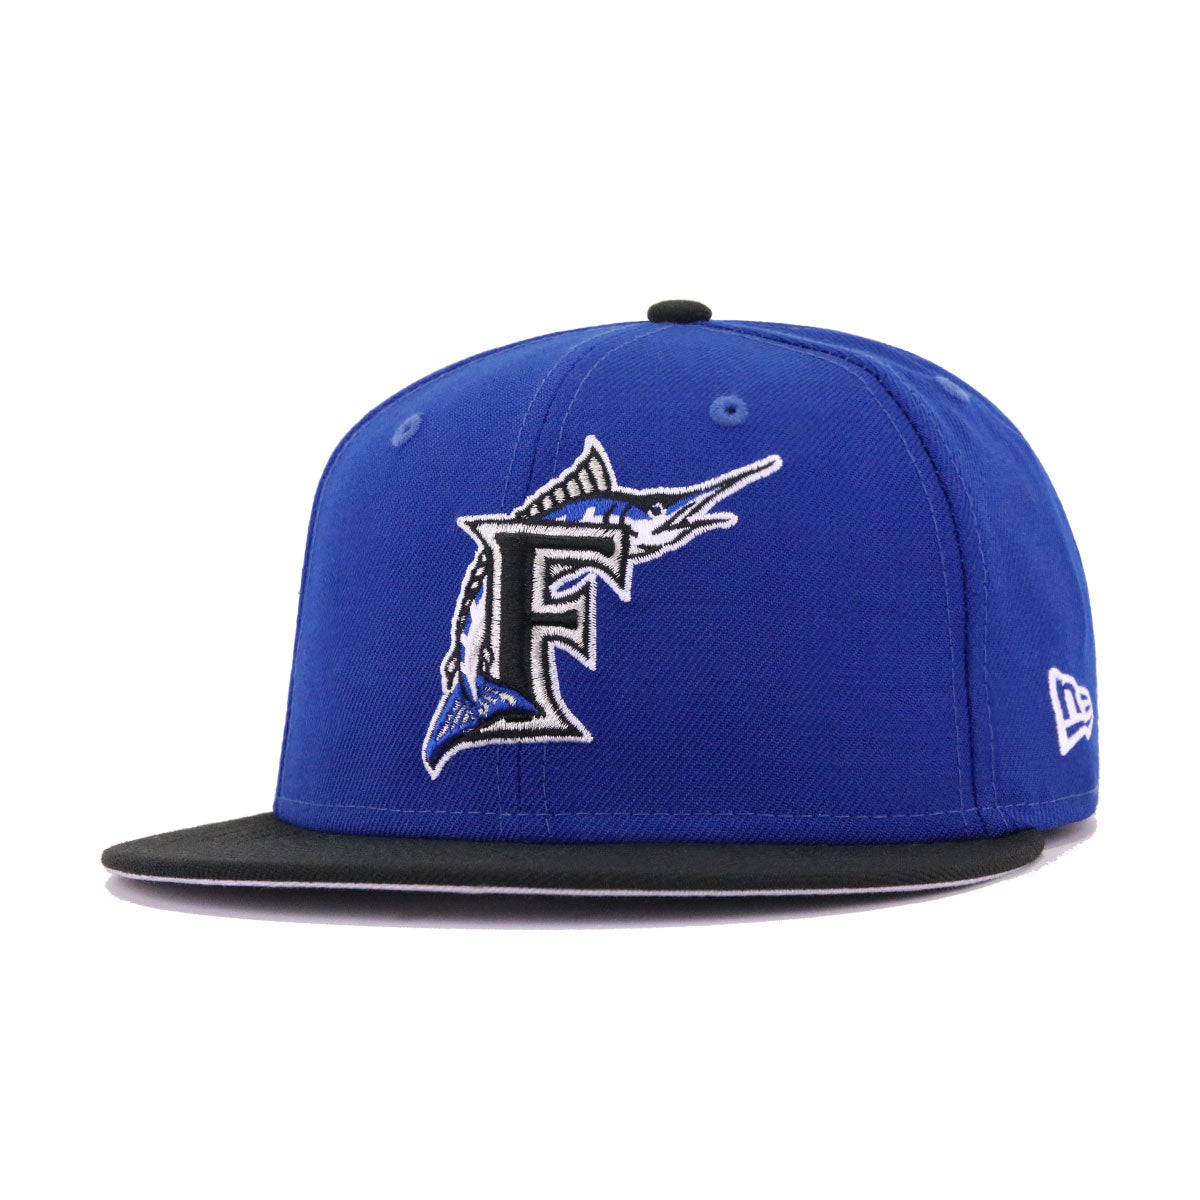 black and royal blue fitted hat